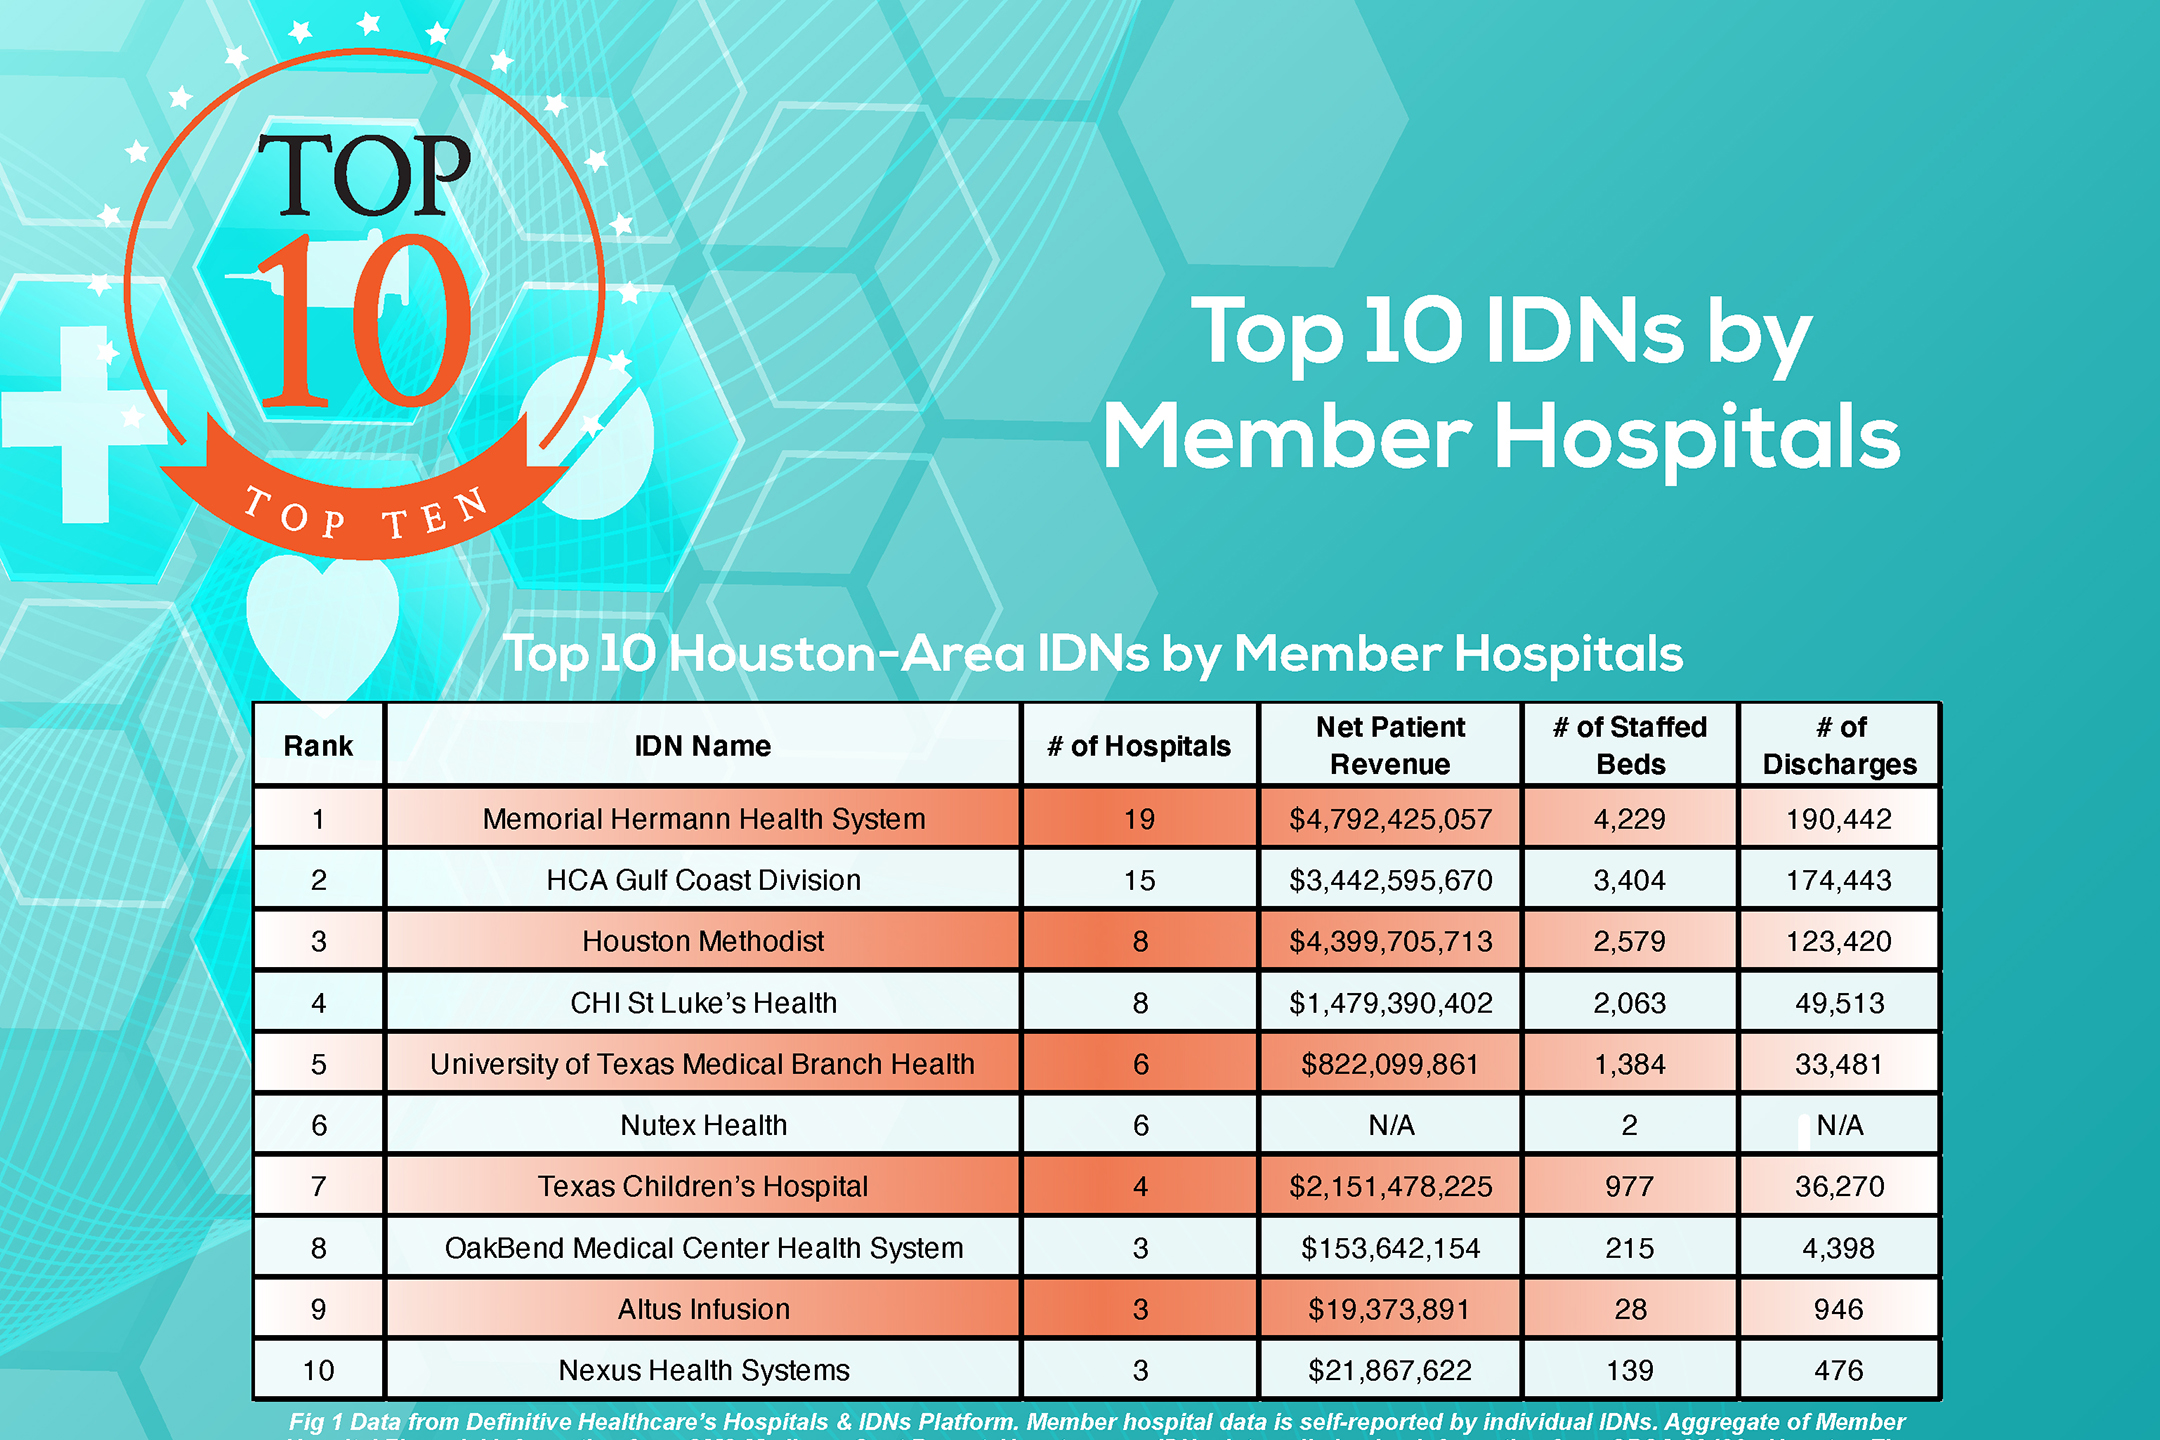 Top 10 IDNs by Member Hospitals